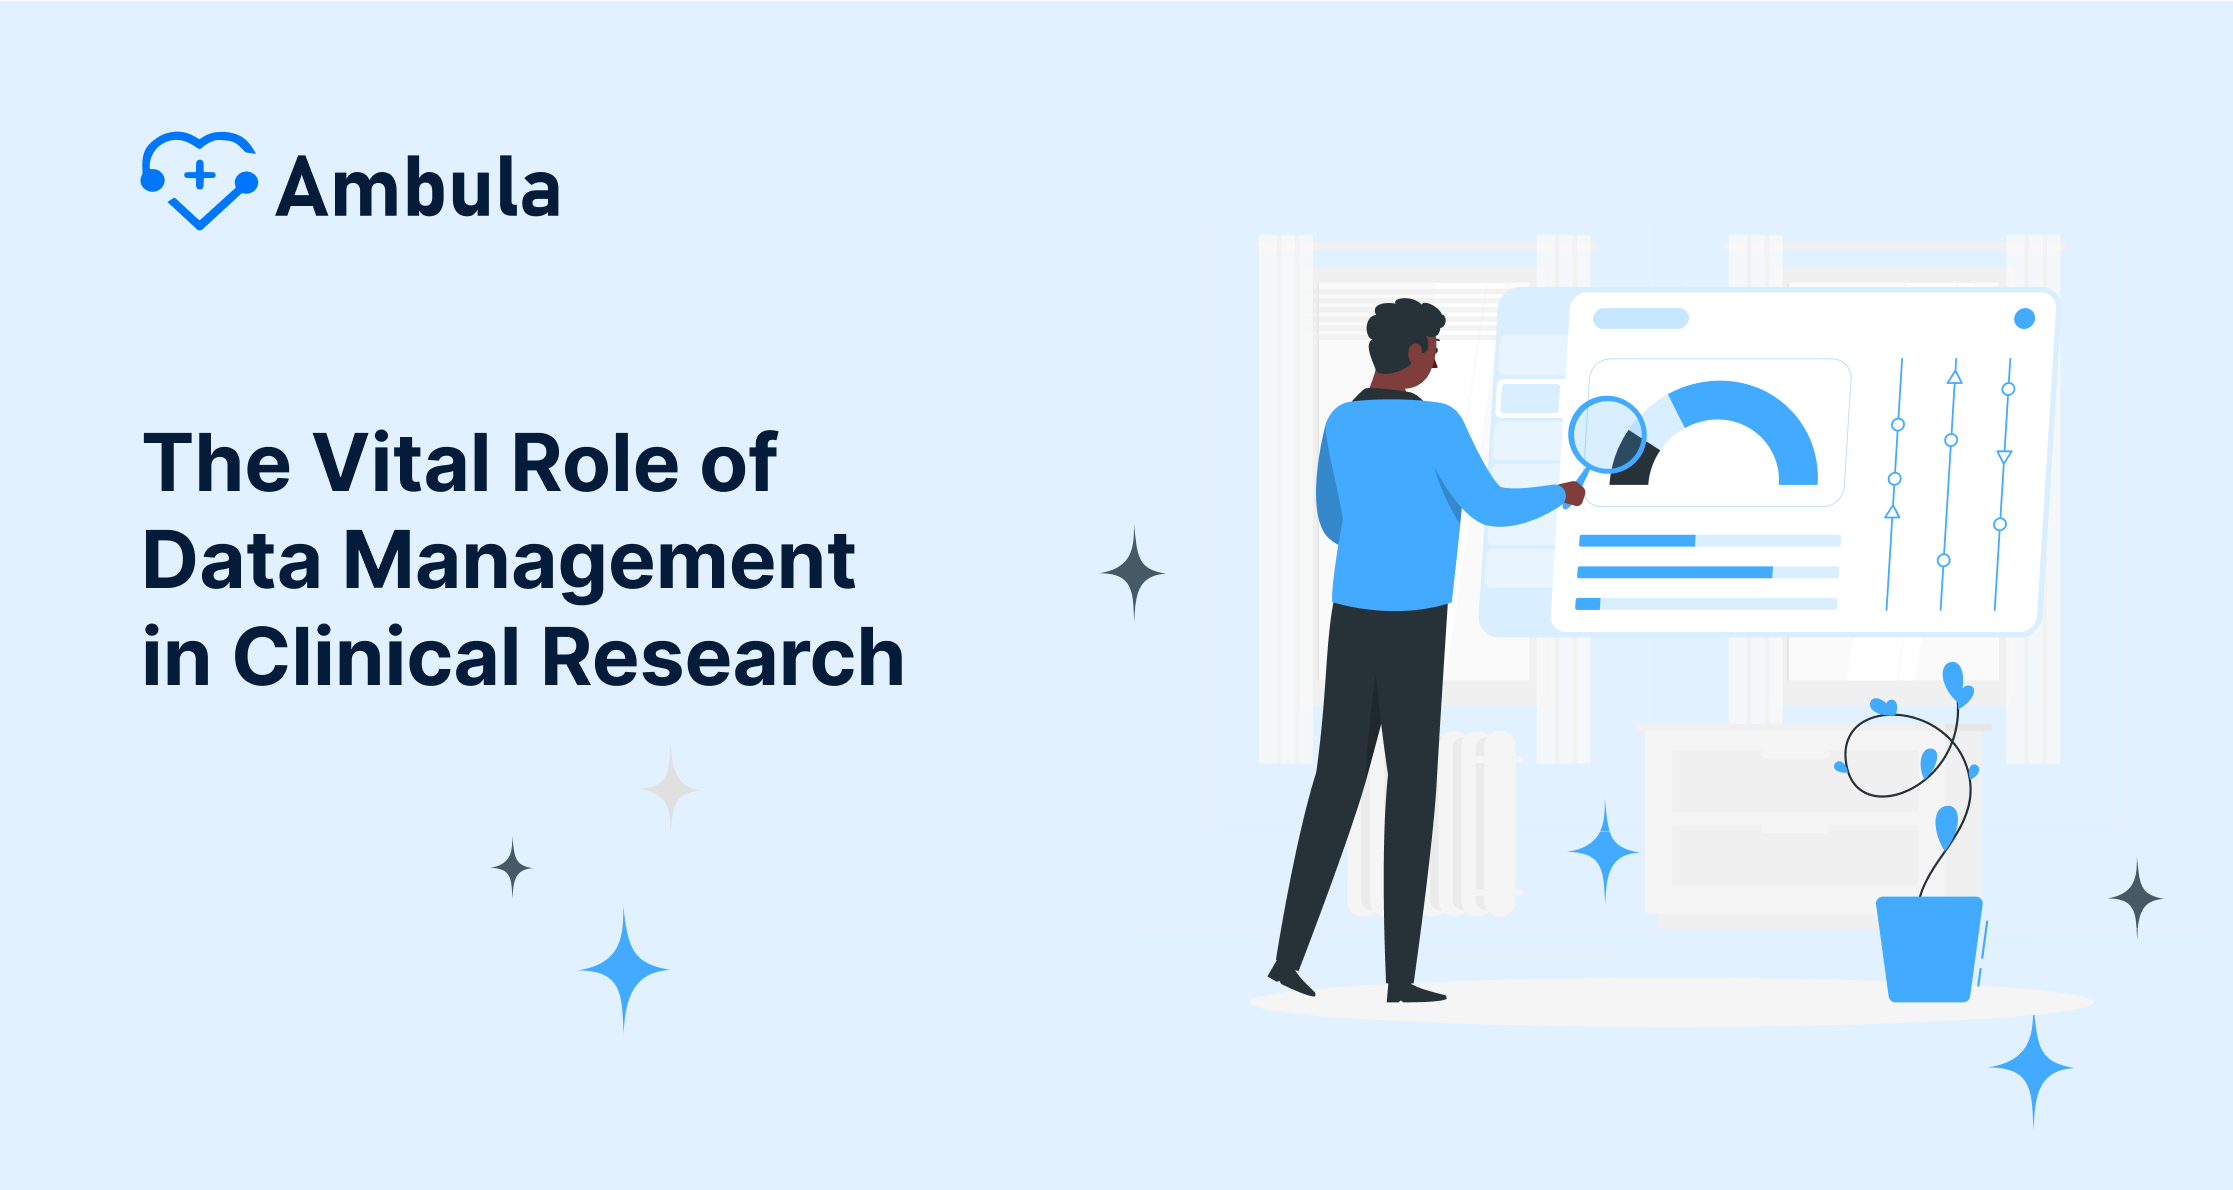 The Vital Role of Data Management in Clinical Research